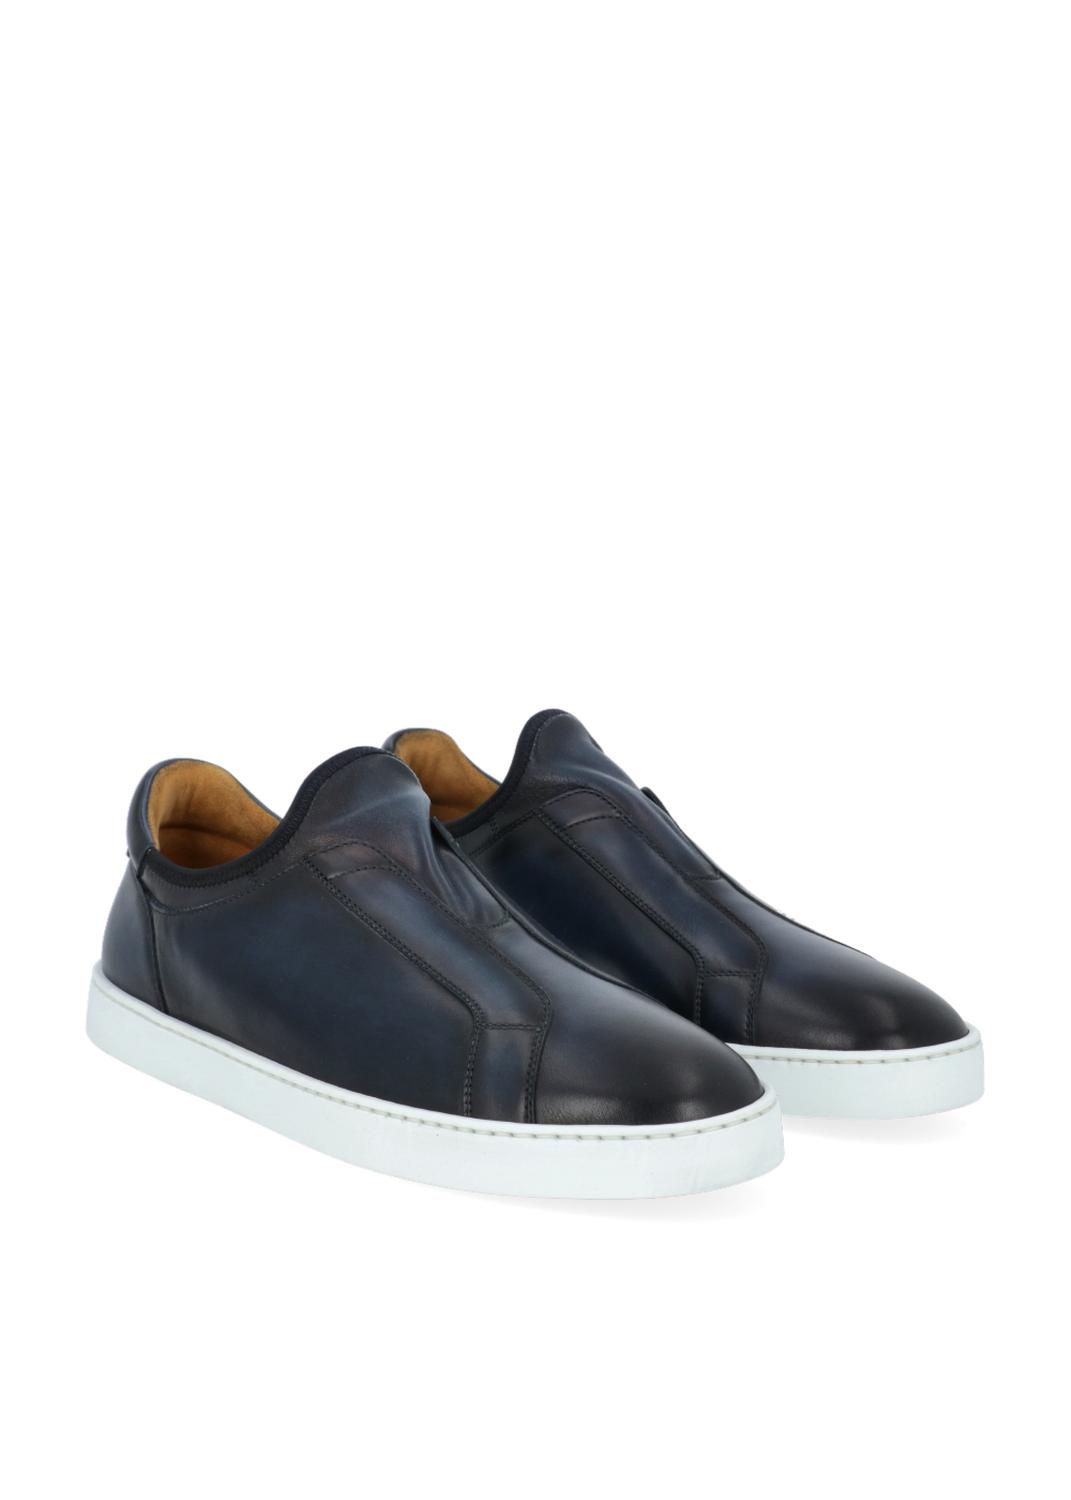 Magnanni Sneakers   MGN-25613